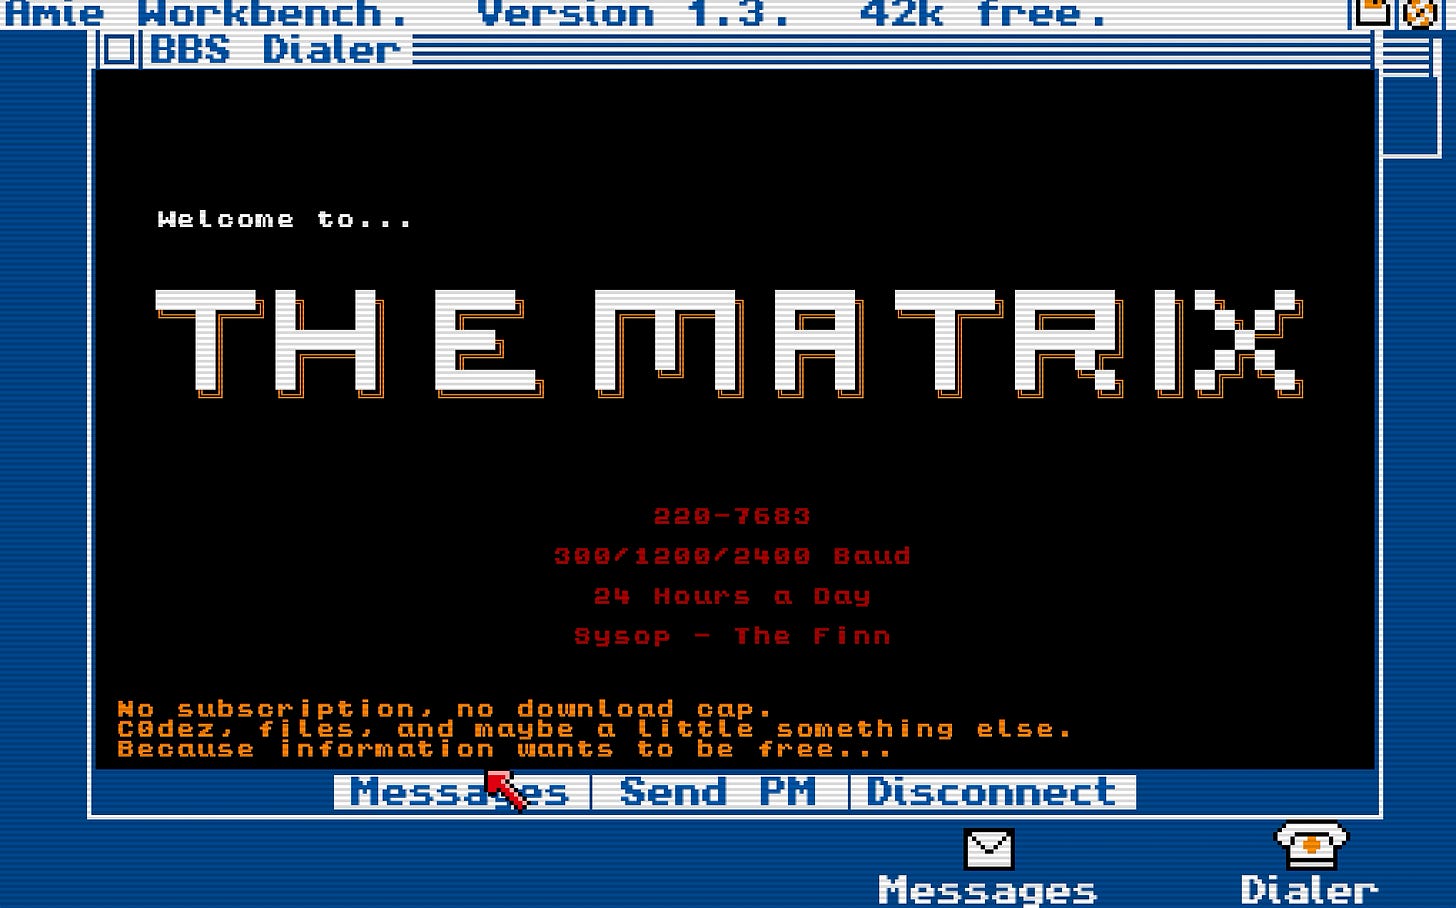 A screenshot from Digital A Love Story, showing the login screen of a fictional BBS called "The Matrix," with the text "No subscription, no download cap. Codez, files, and maybe a little something else. Because information wants to be free..."